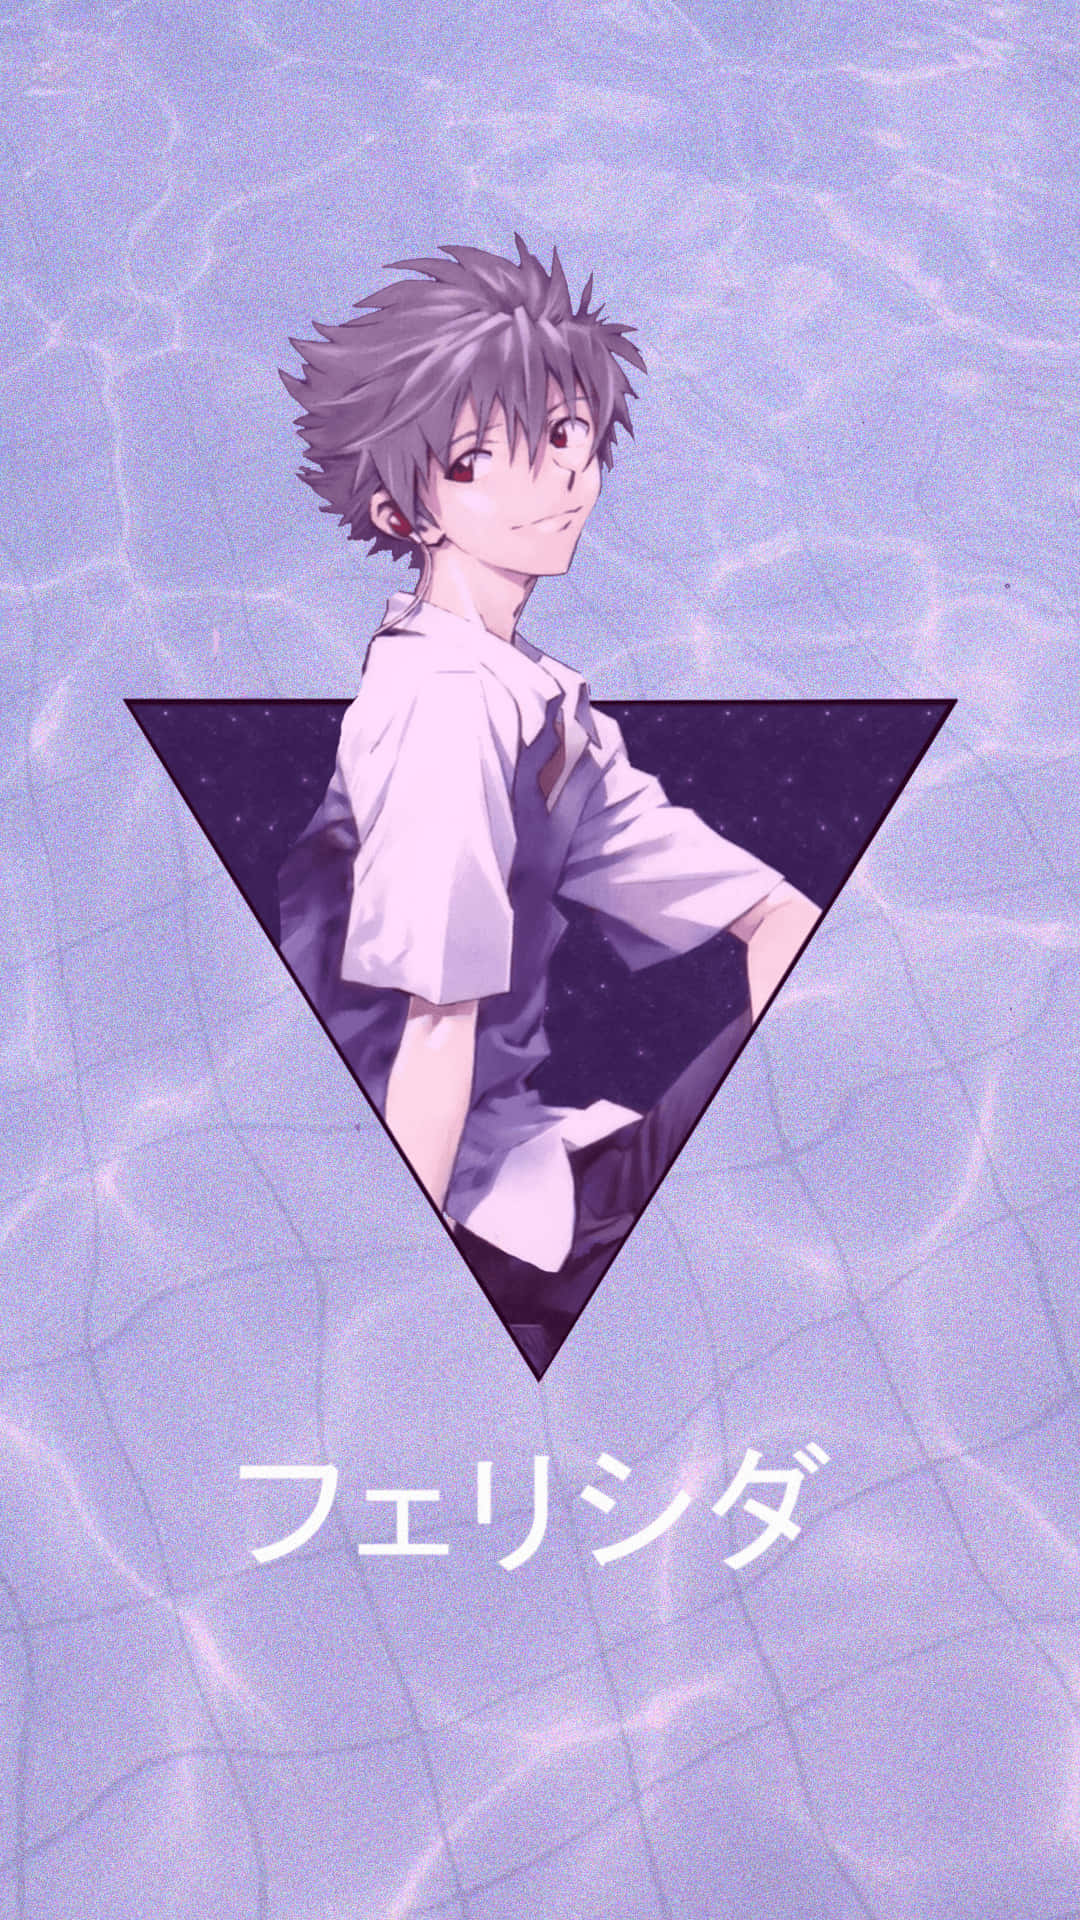 A cool Anime Guy with aesthetic looks Wallpaper